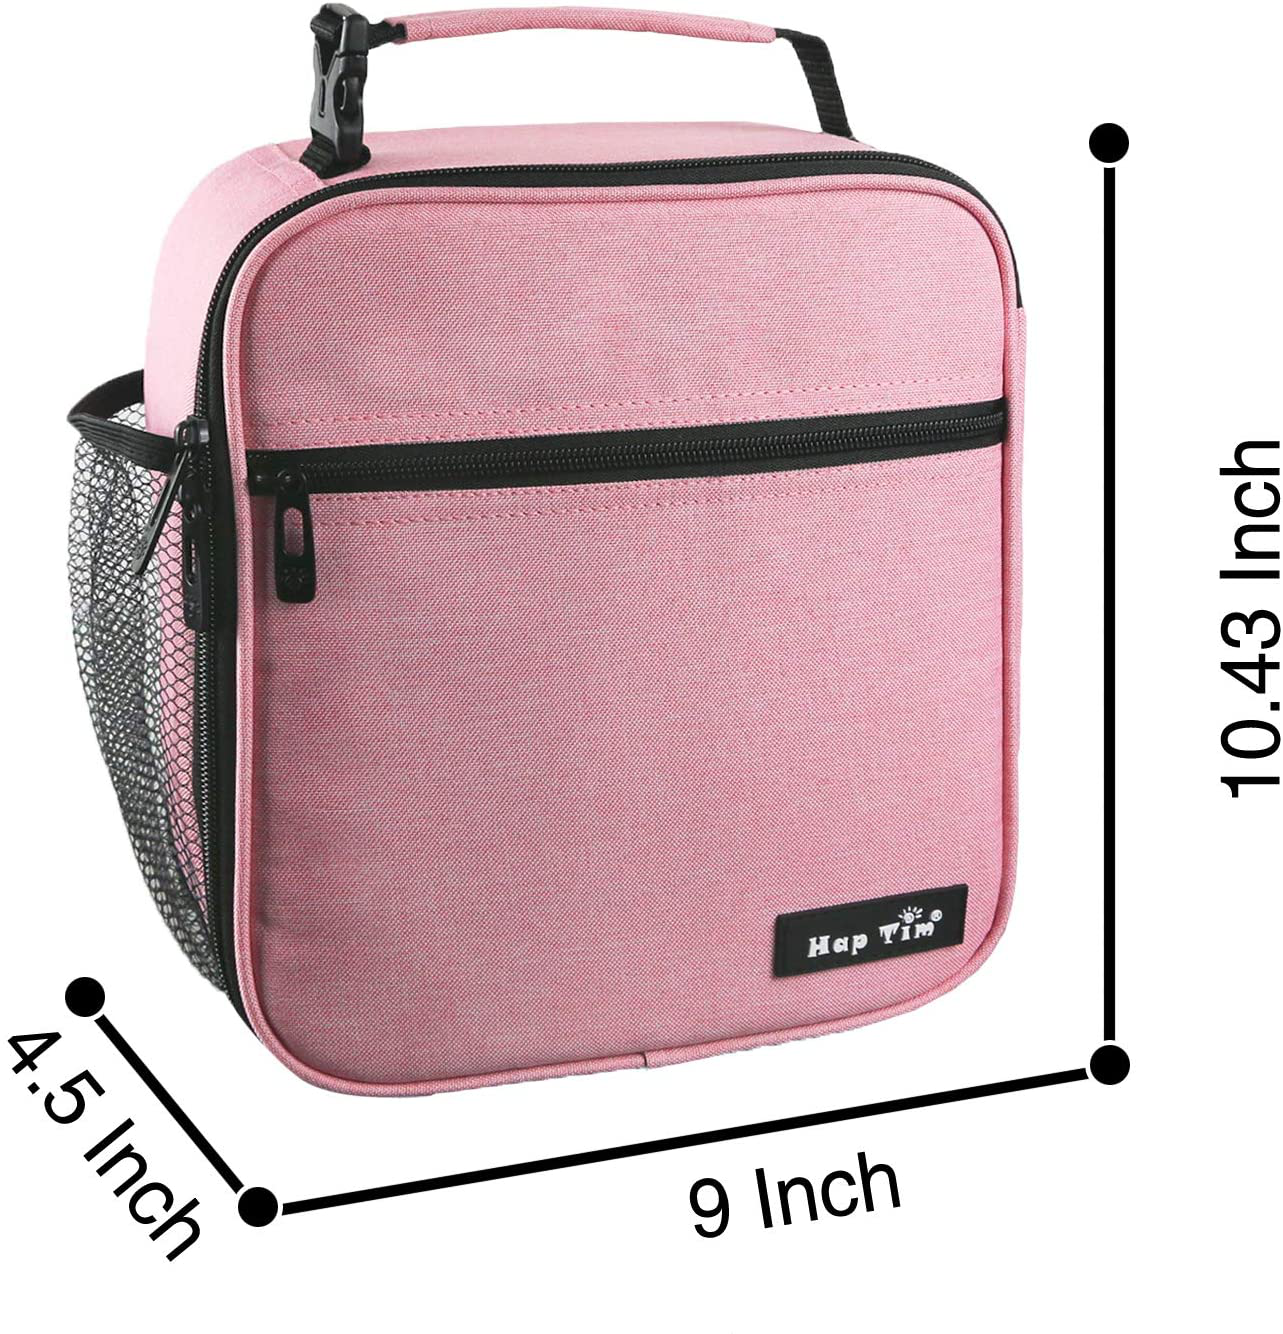 Lunch Bag, VAGREEZ Insulated Lunch Bag Large Waterproof Adult